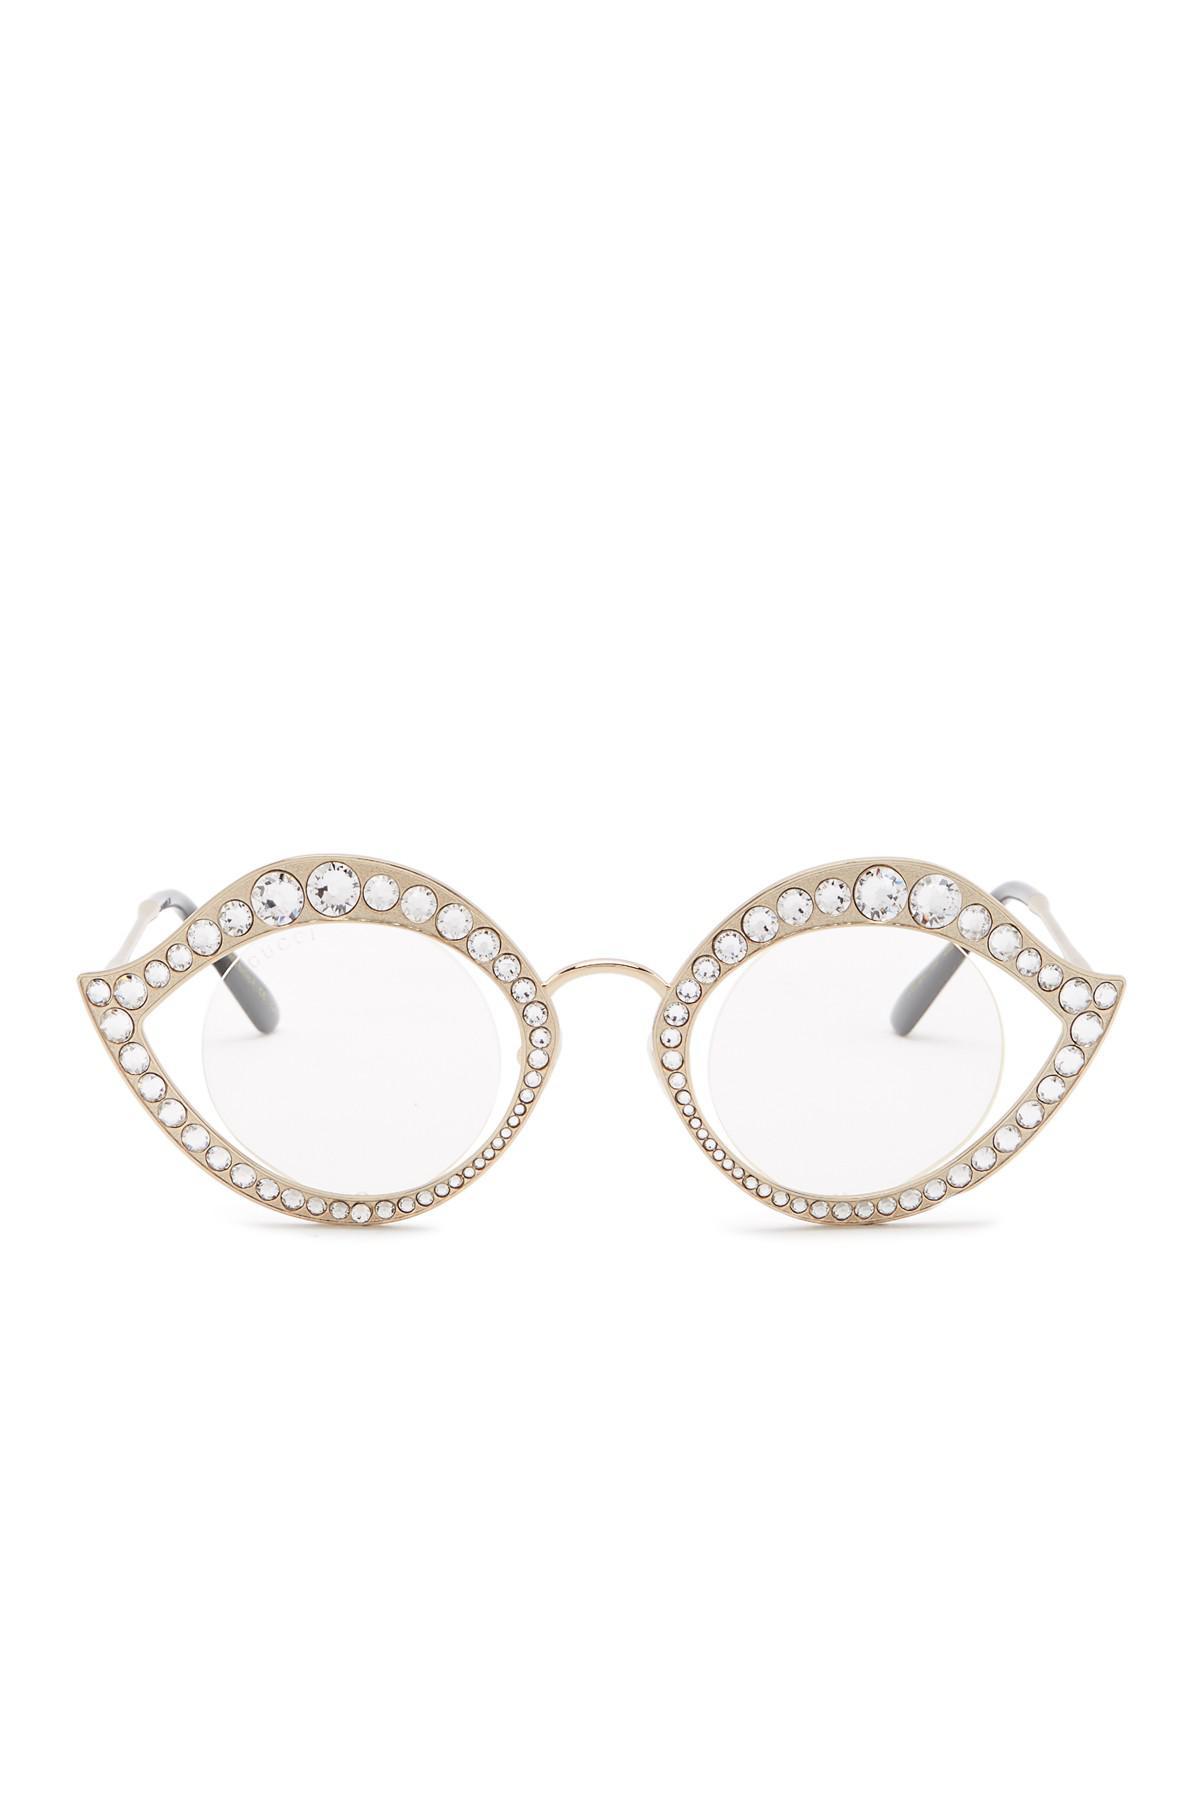 Gucci Crystal-studded Cat Eye Glasses in Metallic | Lyst